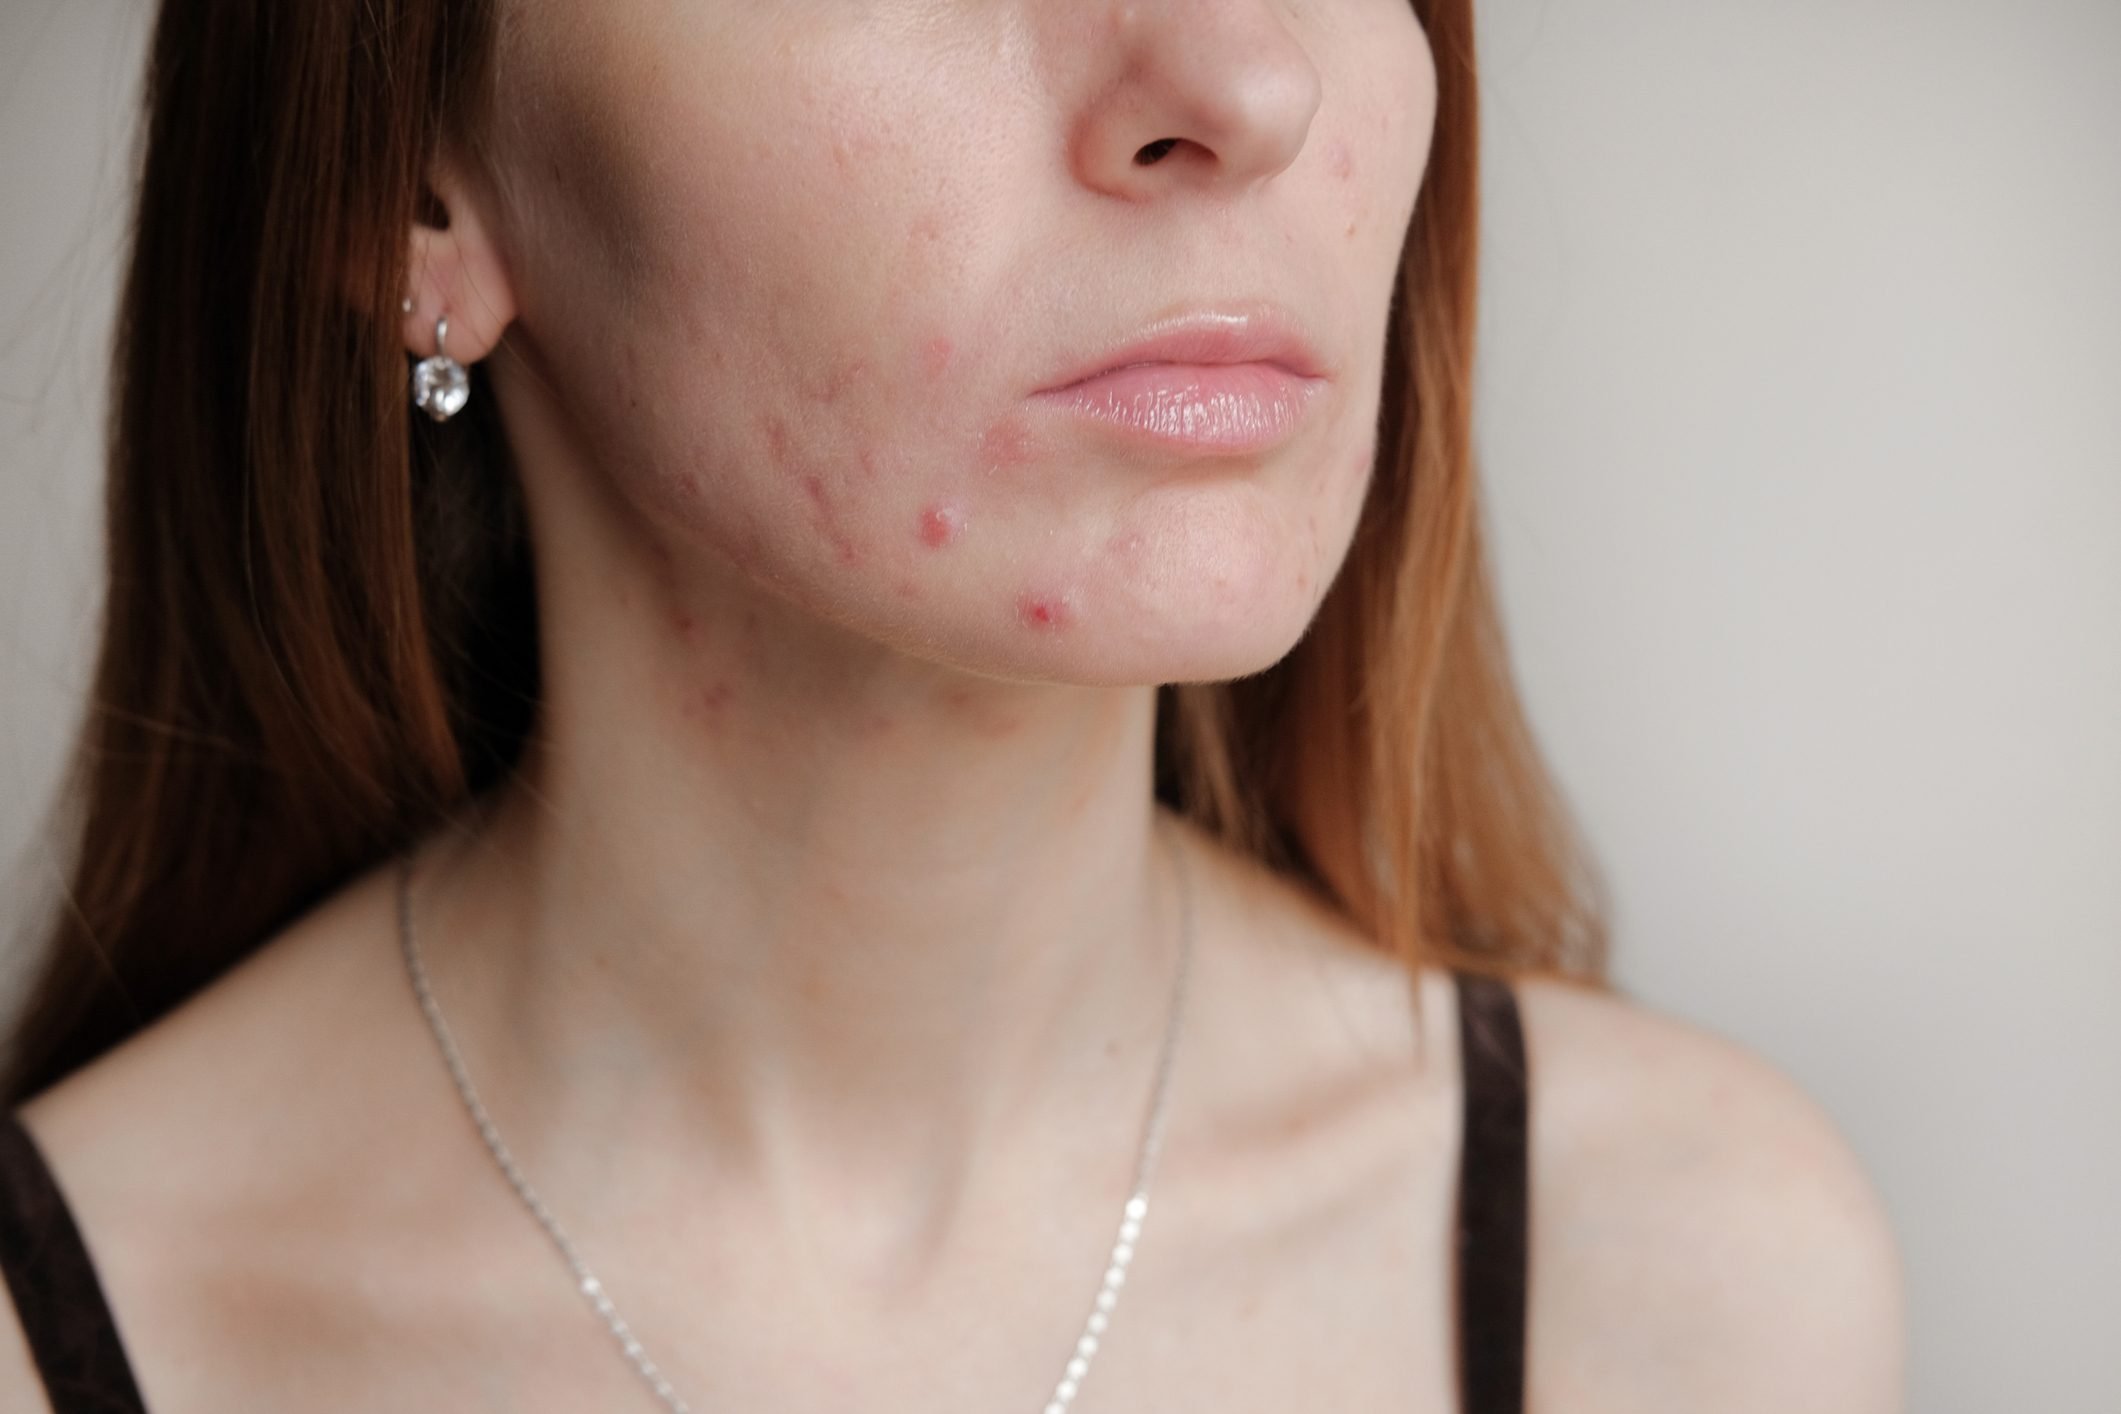 Adult Acne 10 Worst Myths About Adult Acne The Healthy 0902